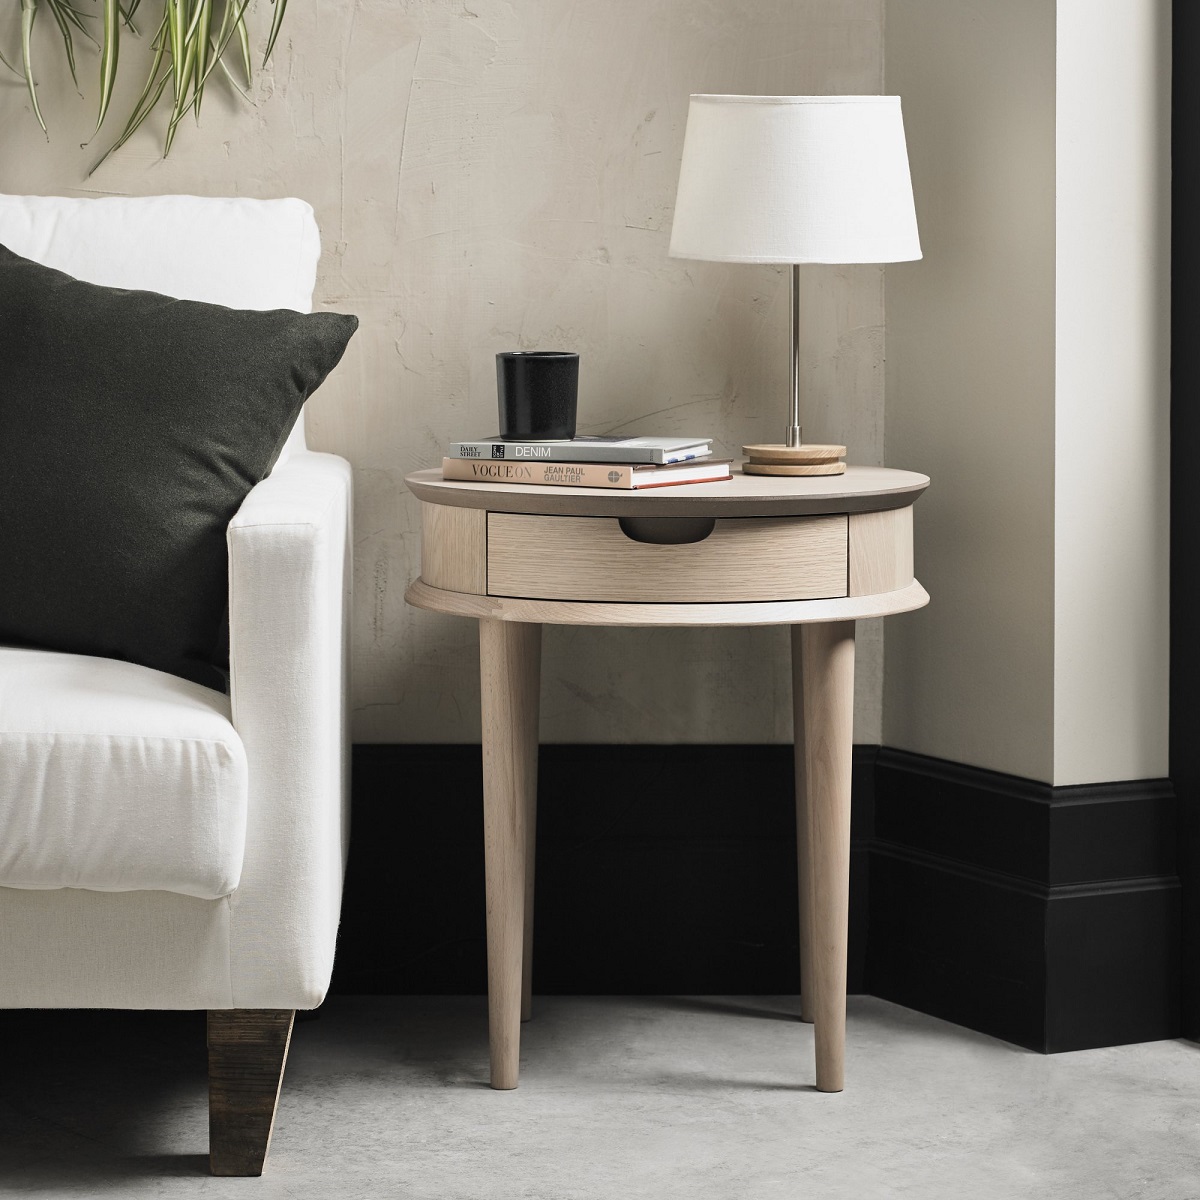 Beautifully proportioned with an eye-catching #Scandinavian design, the Dansk #Scandi Oak #LampTable with Drawer is the perfect place to stand a lamp in your #livingroom.

Browse it on our website here.👇
oakfurnitureuk.com/dansk-scandi-o…
-
-
-
#sidetable #sofatable #occasionaltable #home